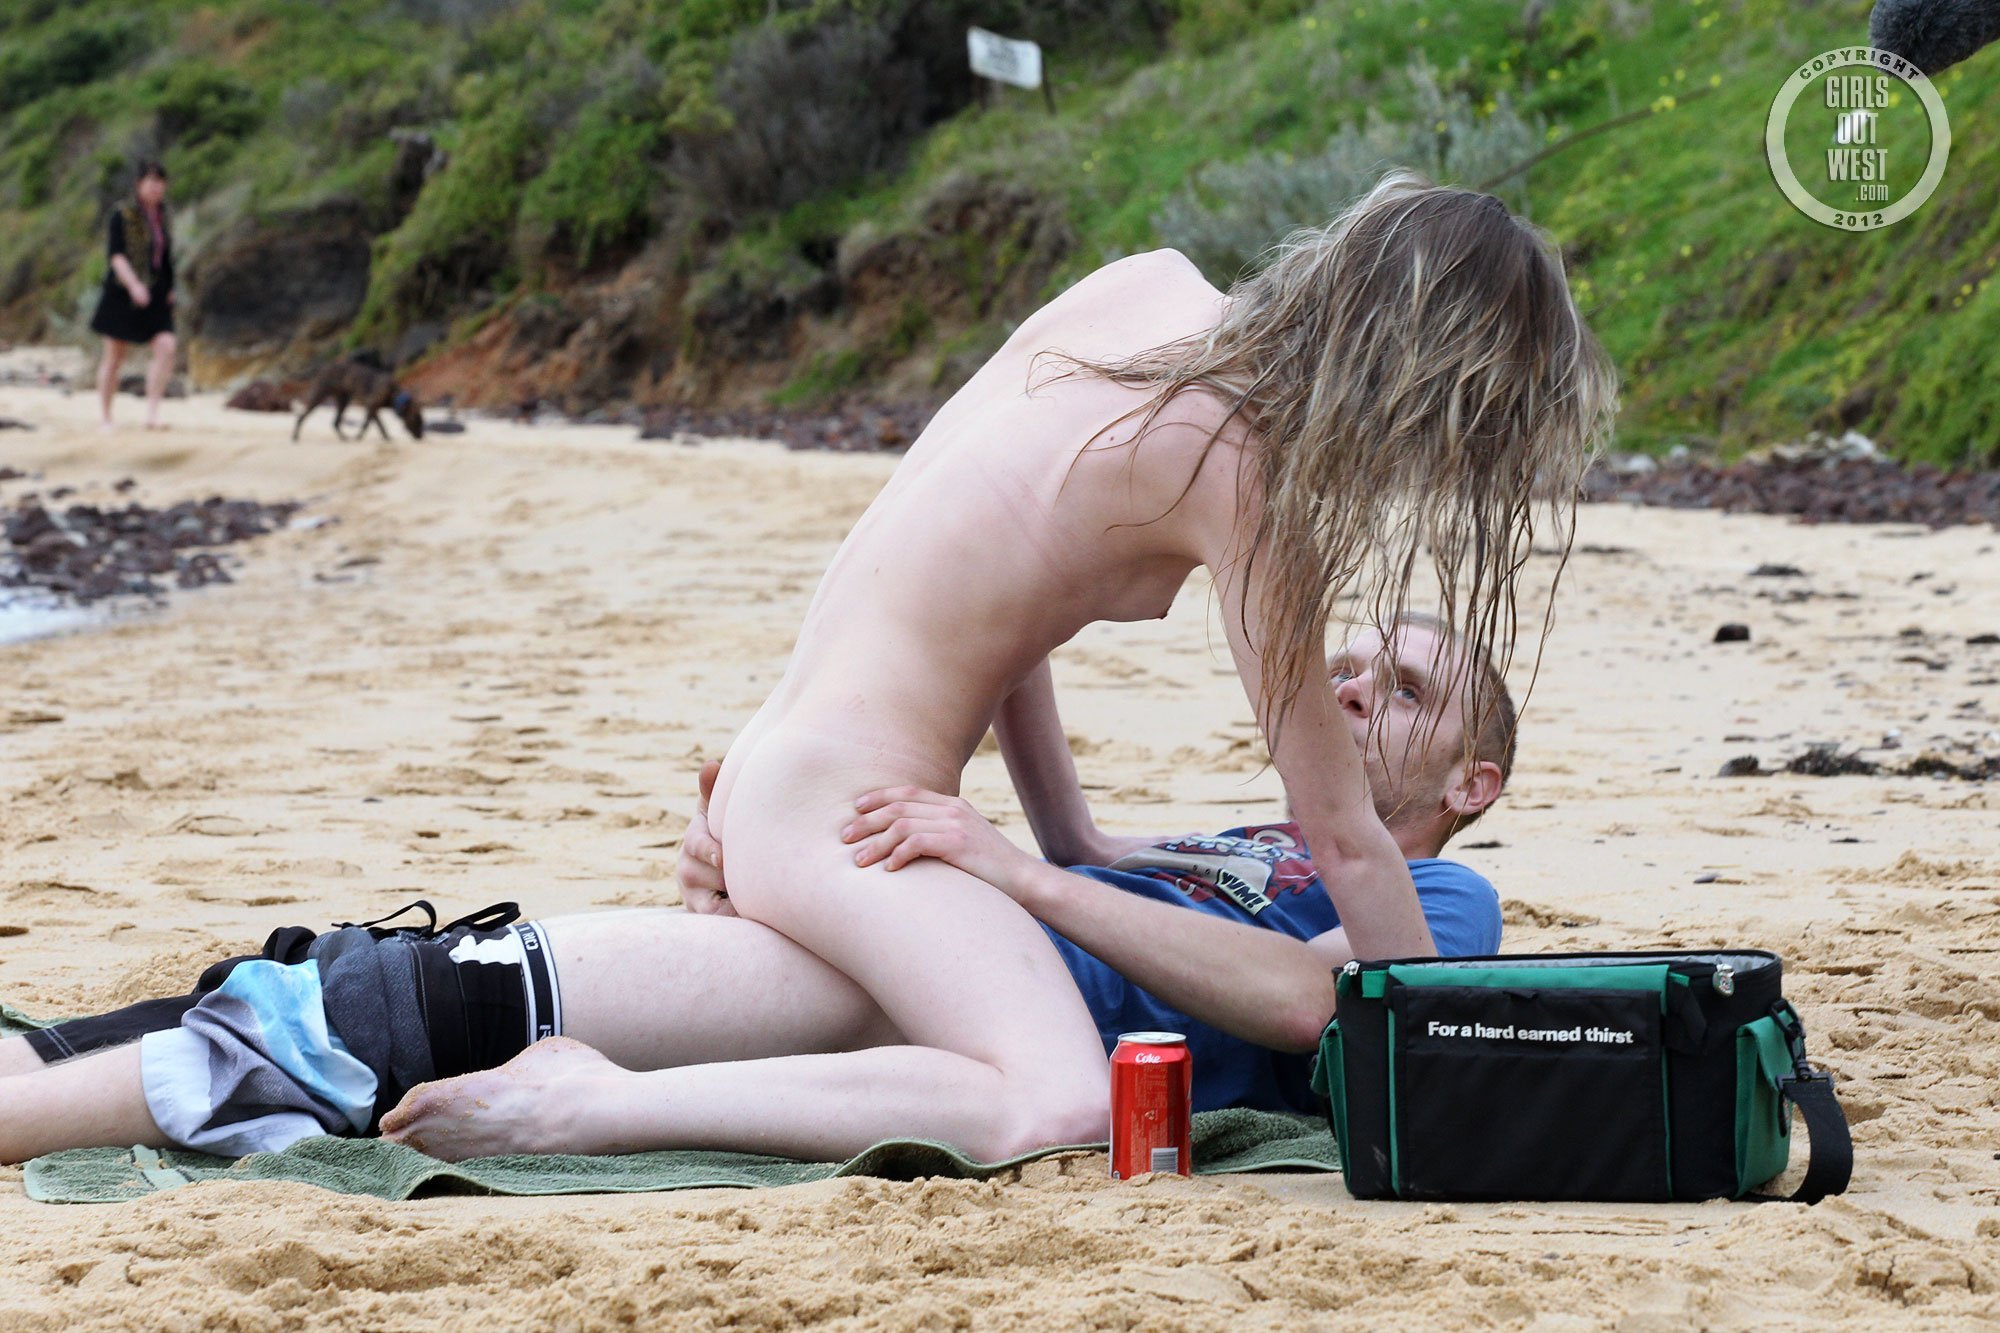 Woman at beach getting fucked